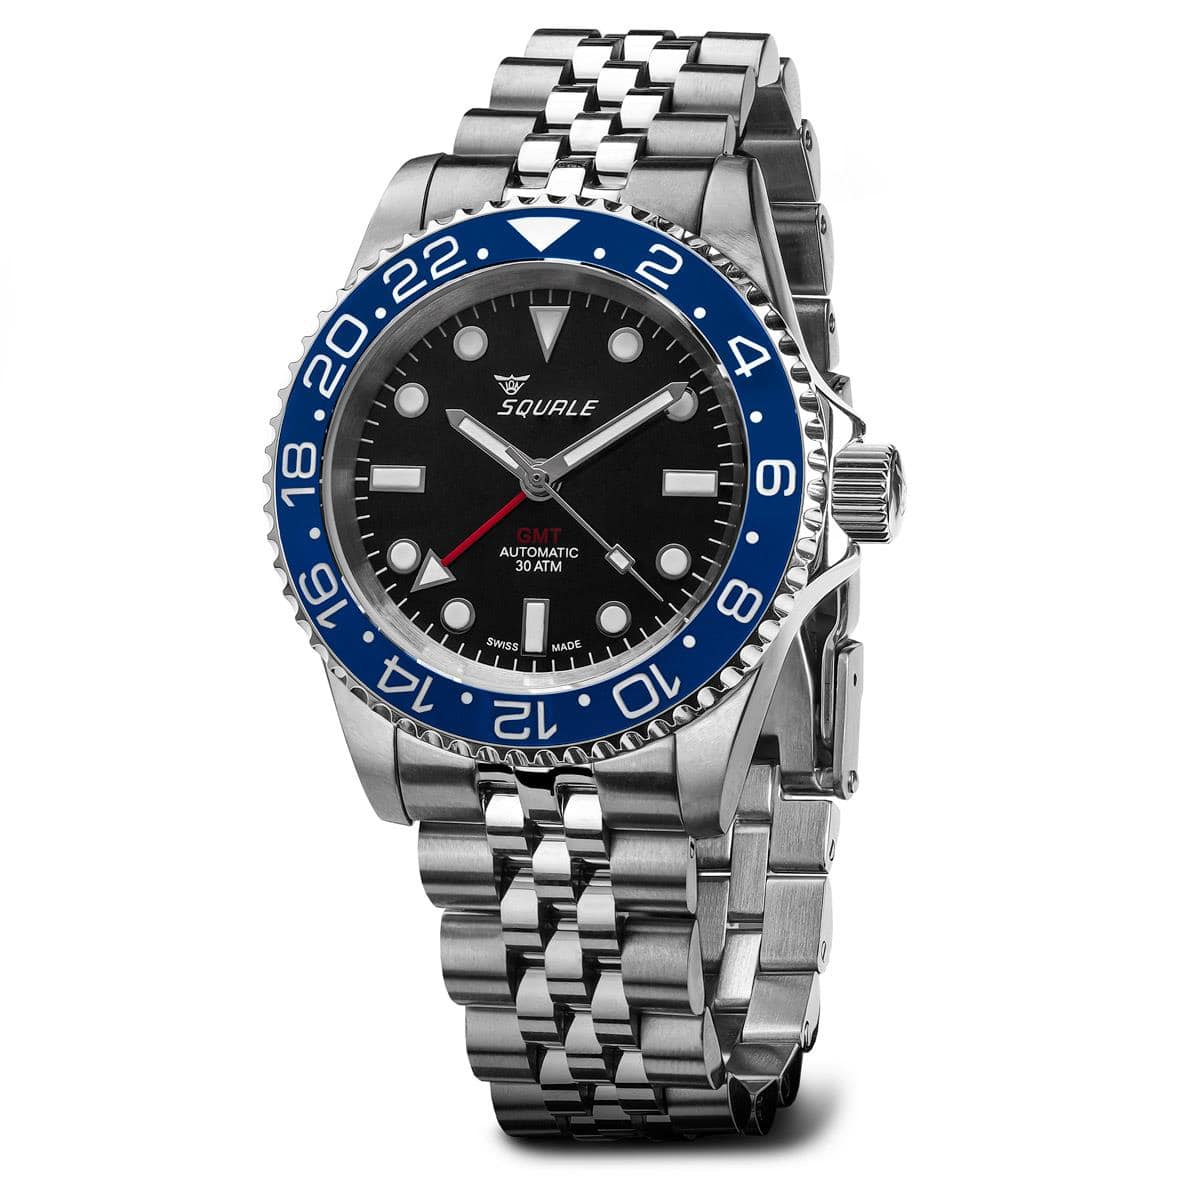 Squale 30 ATMOS 1545 GMT Mechanical Watch - Black / Blue - NEARLY NEW